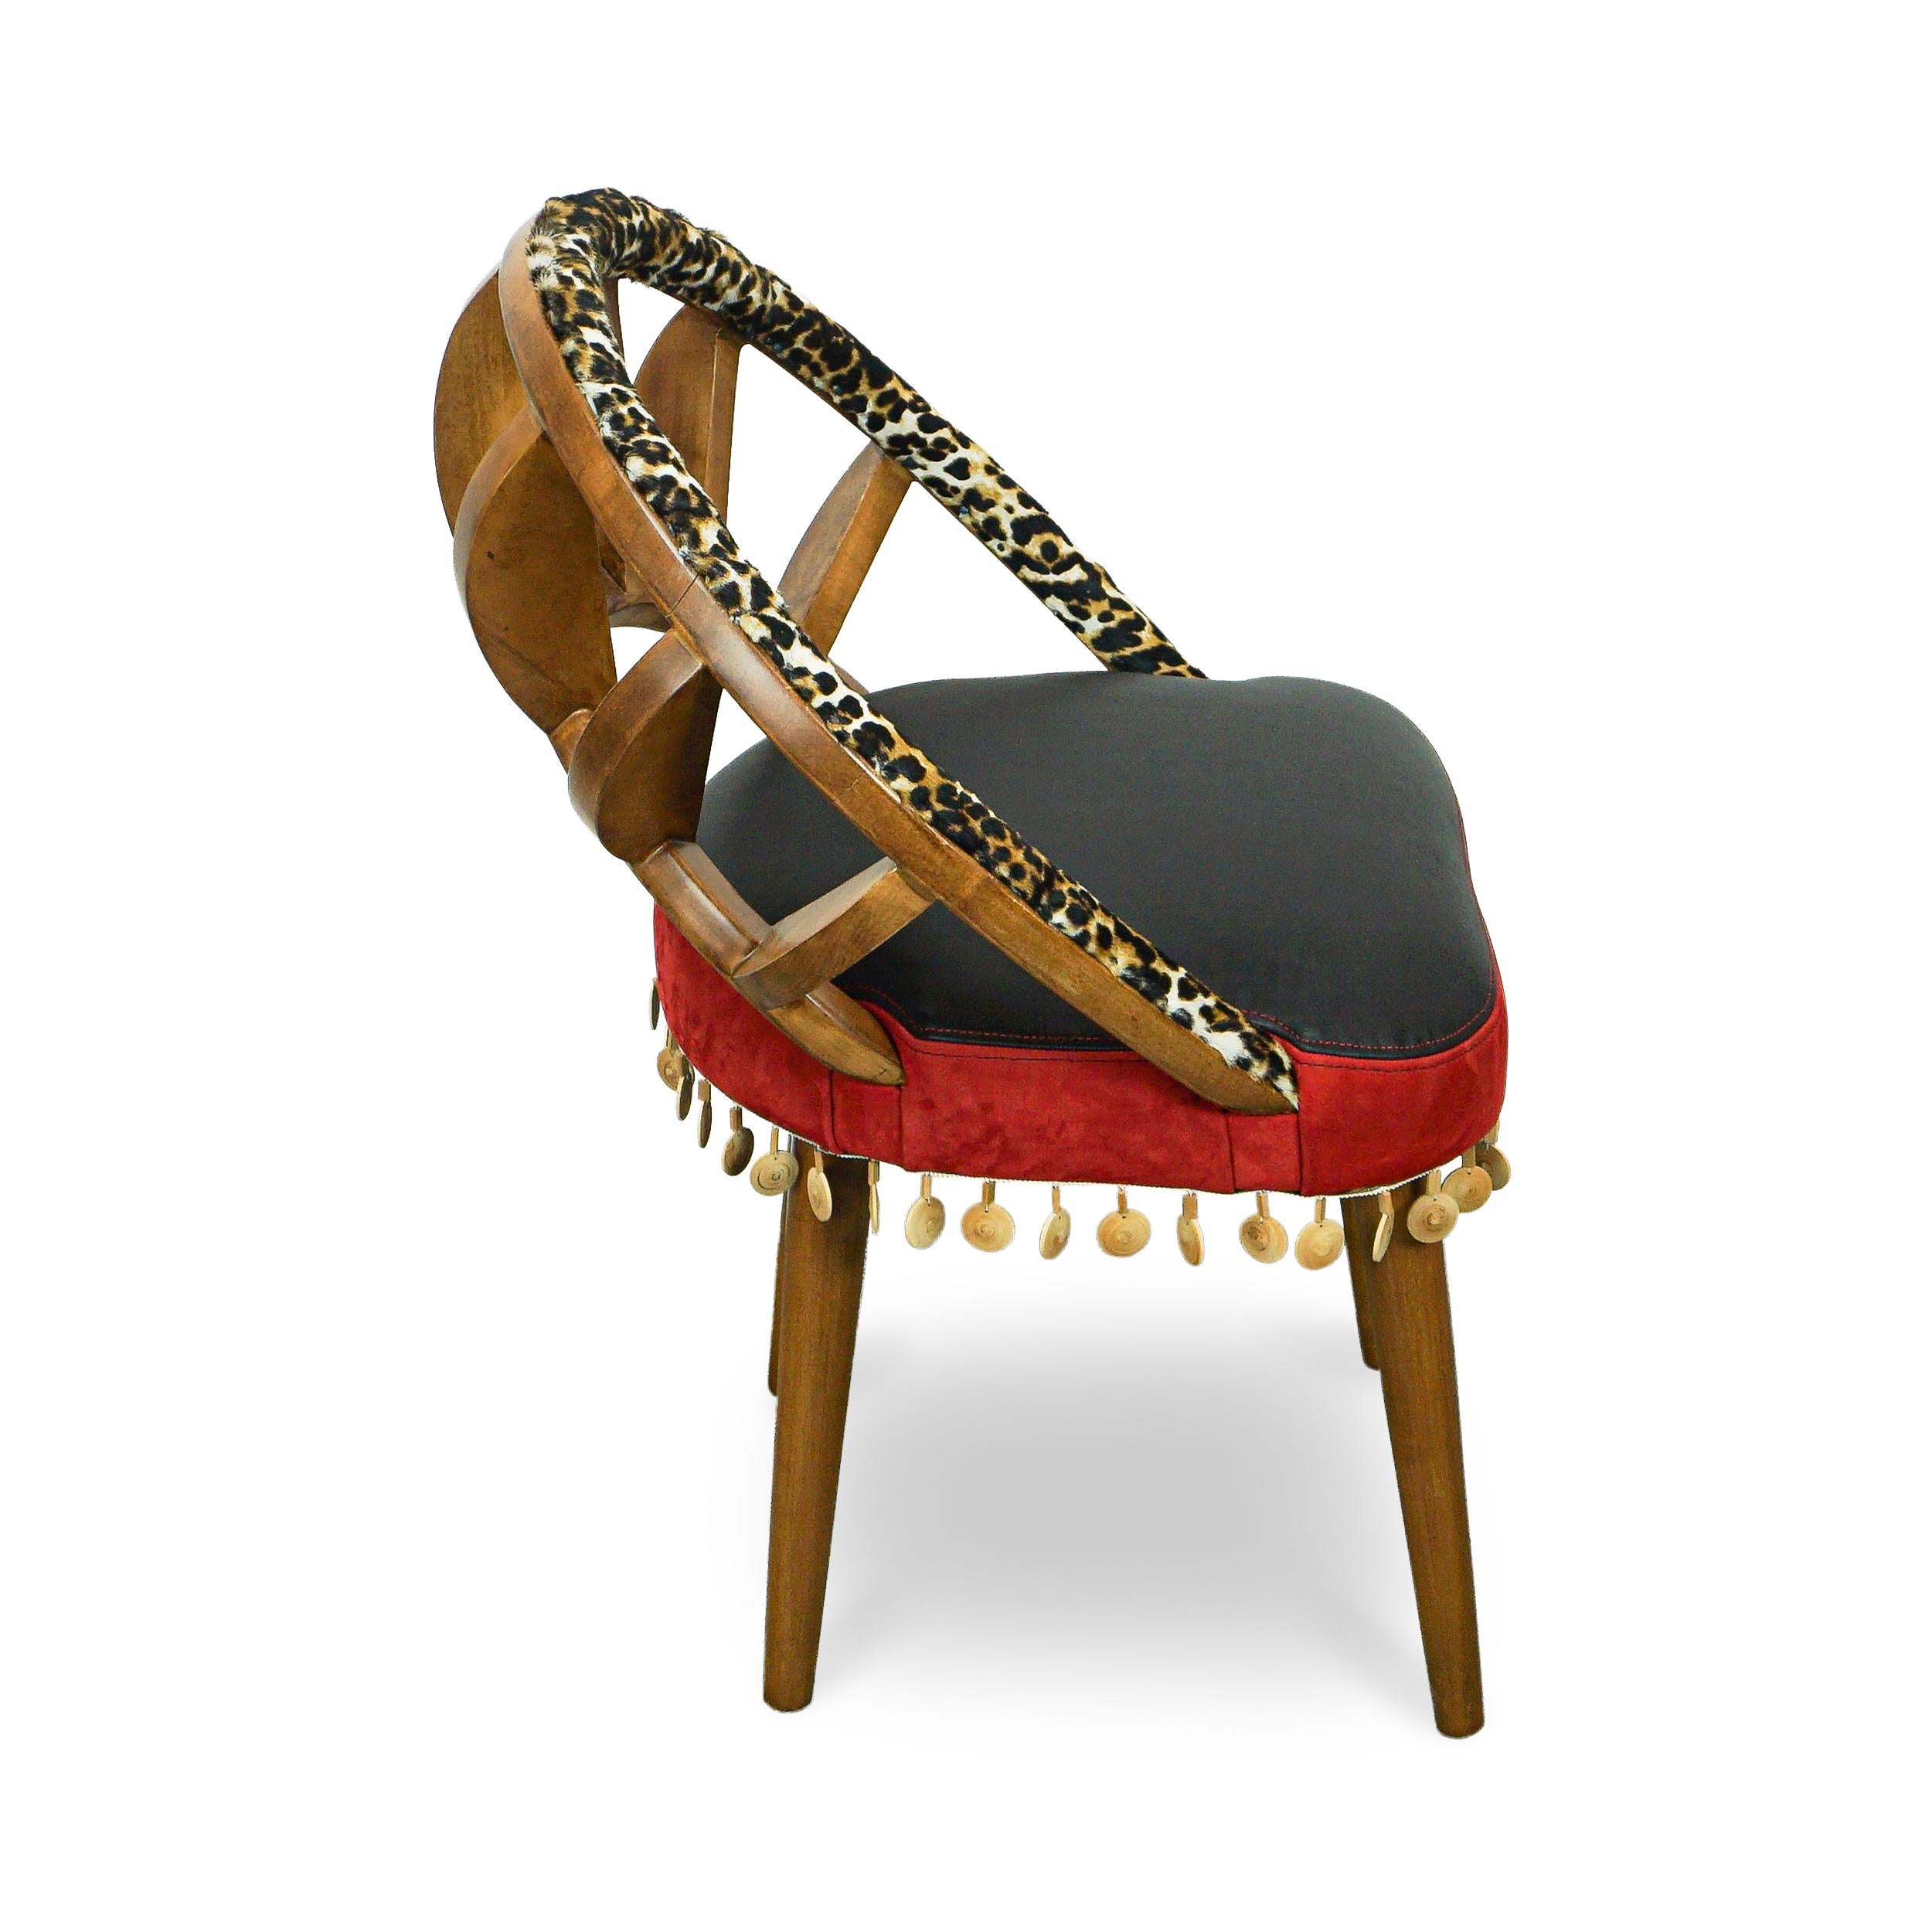 Contemporary Ribbed Wood Chair with Cheetah Hair on Hide, Red + Black Leather and Wood Bead For Sale